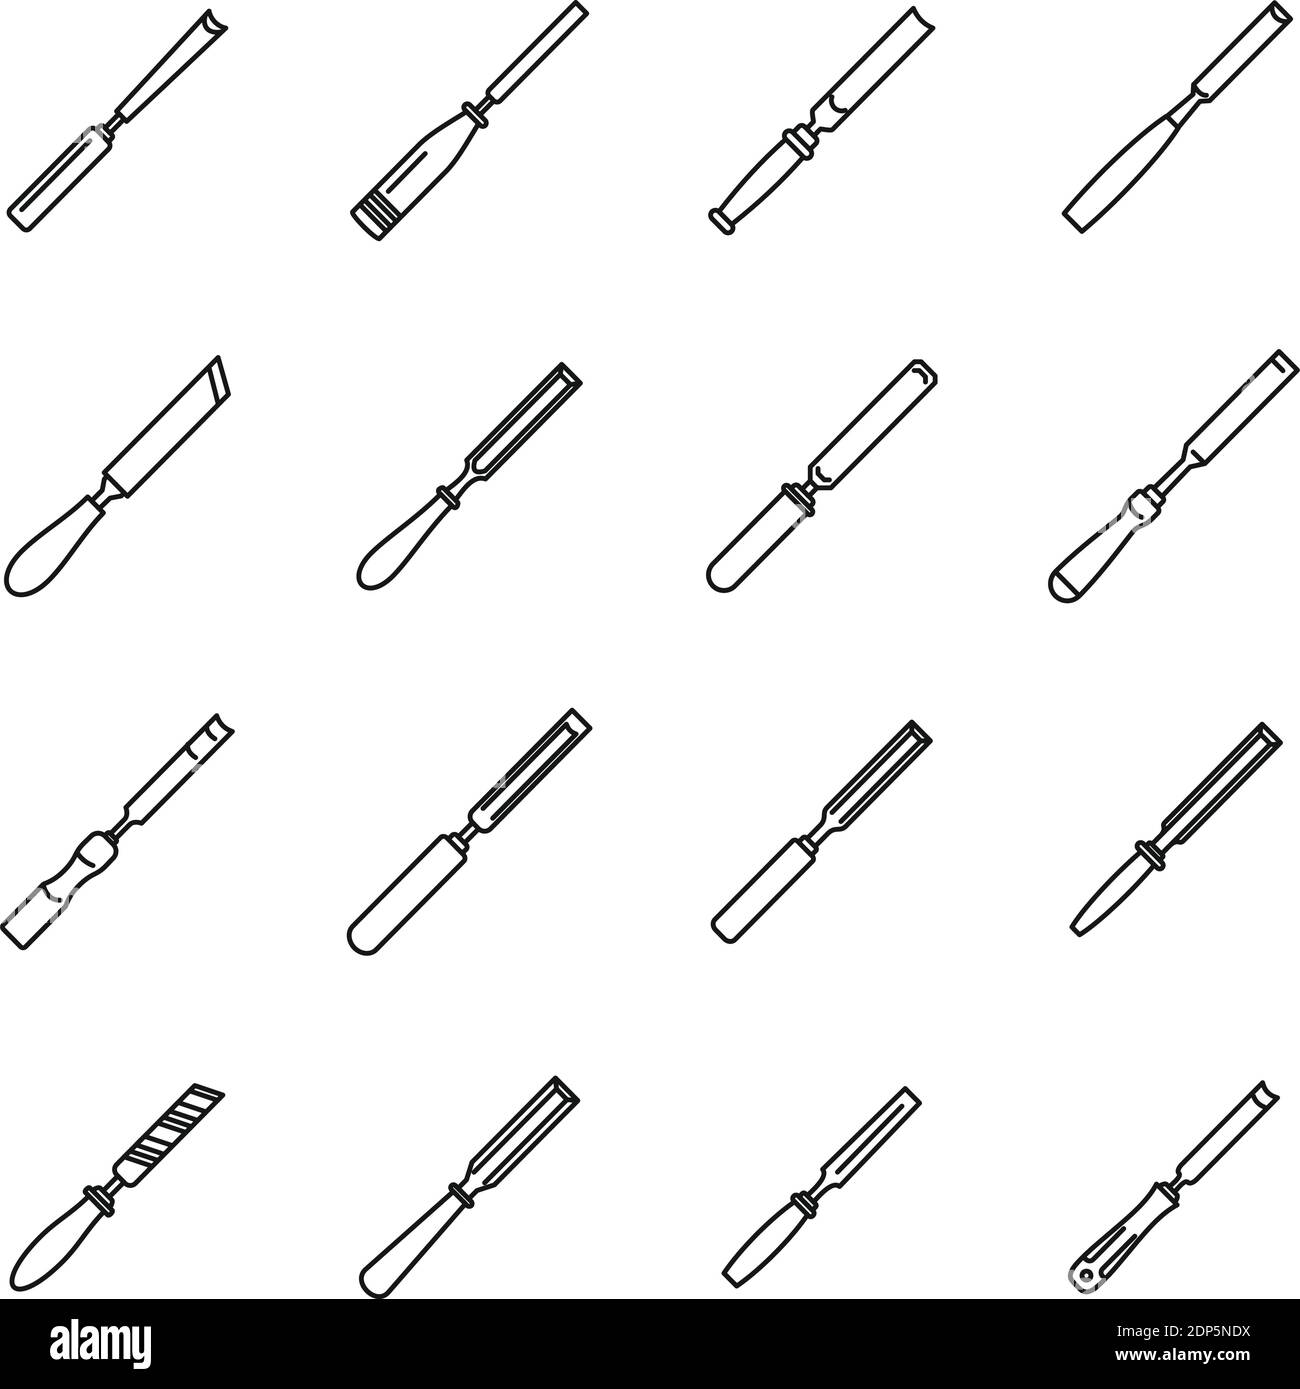 Carpenter chisel Stock Vector Images - Alamy